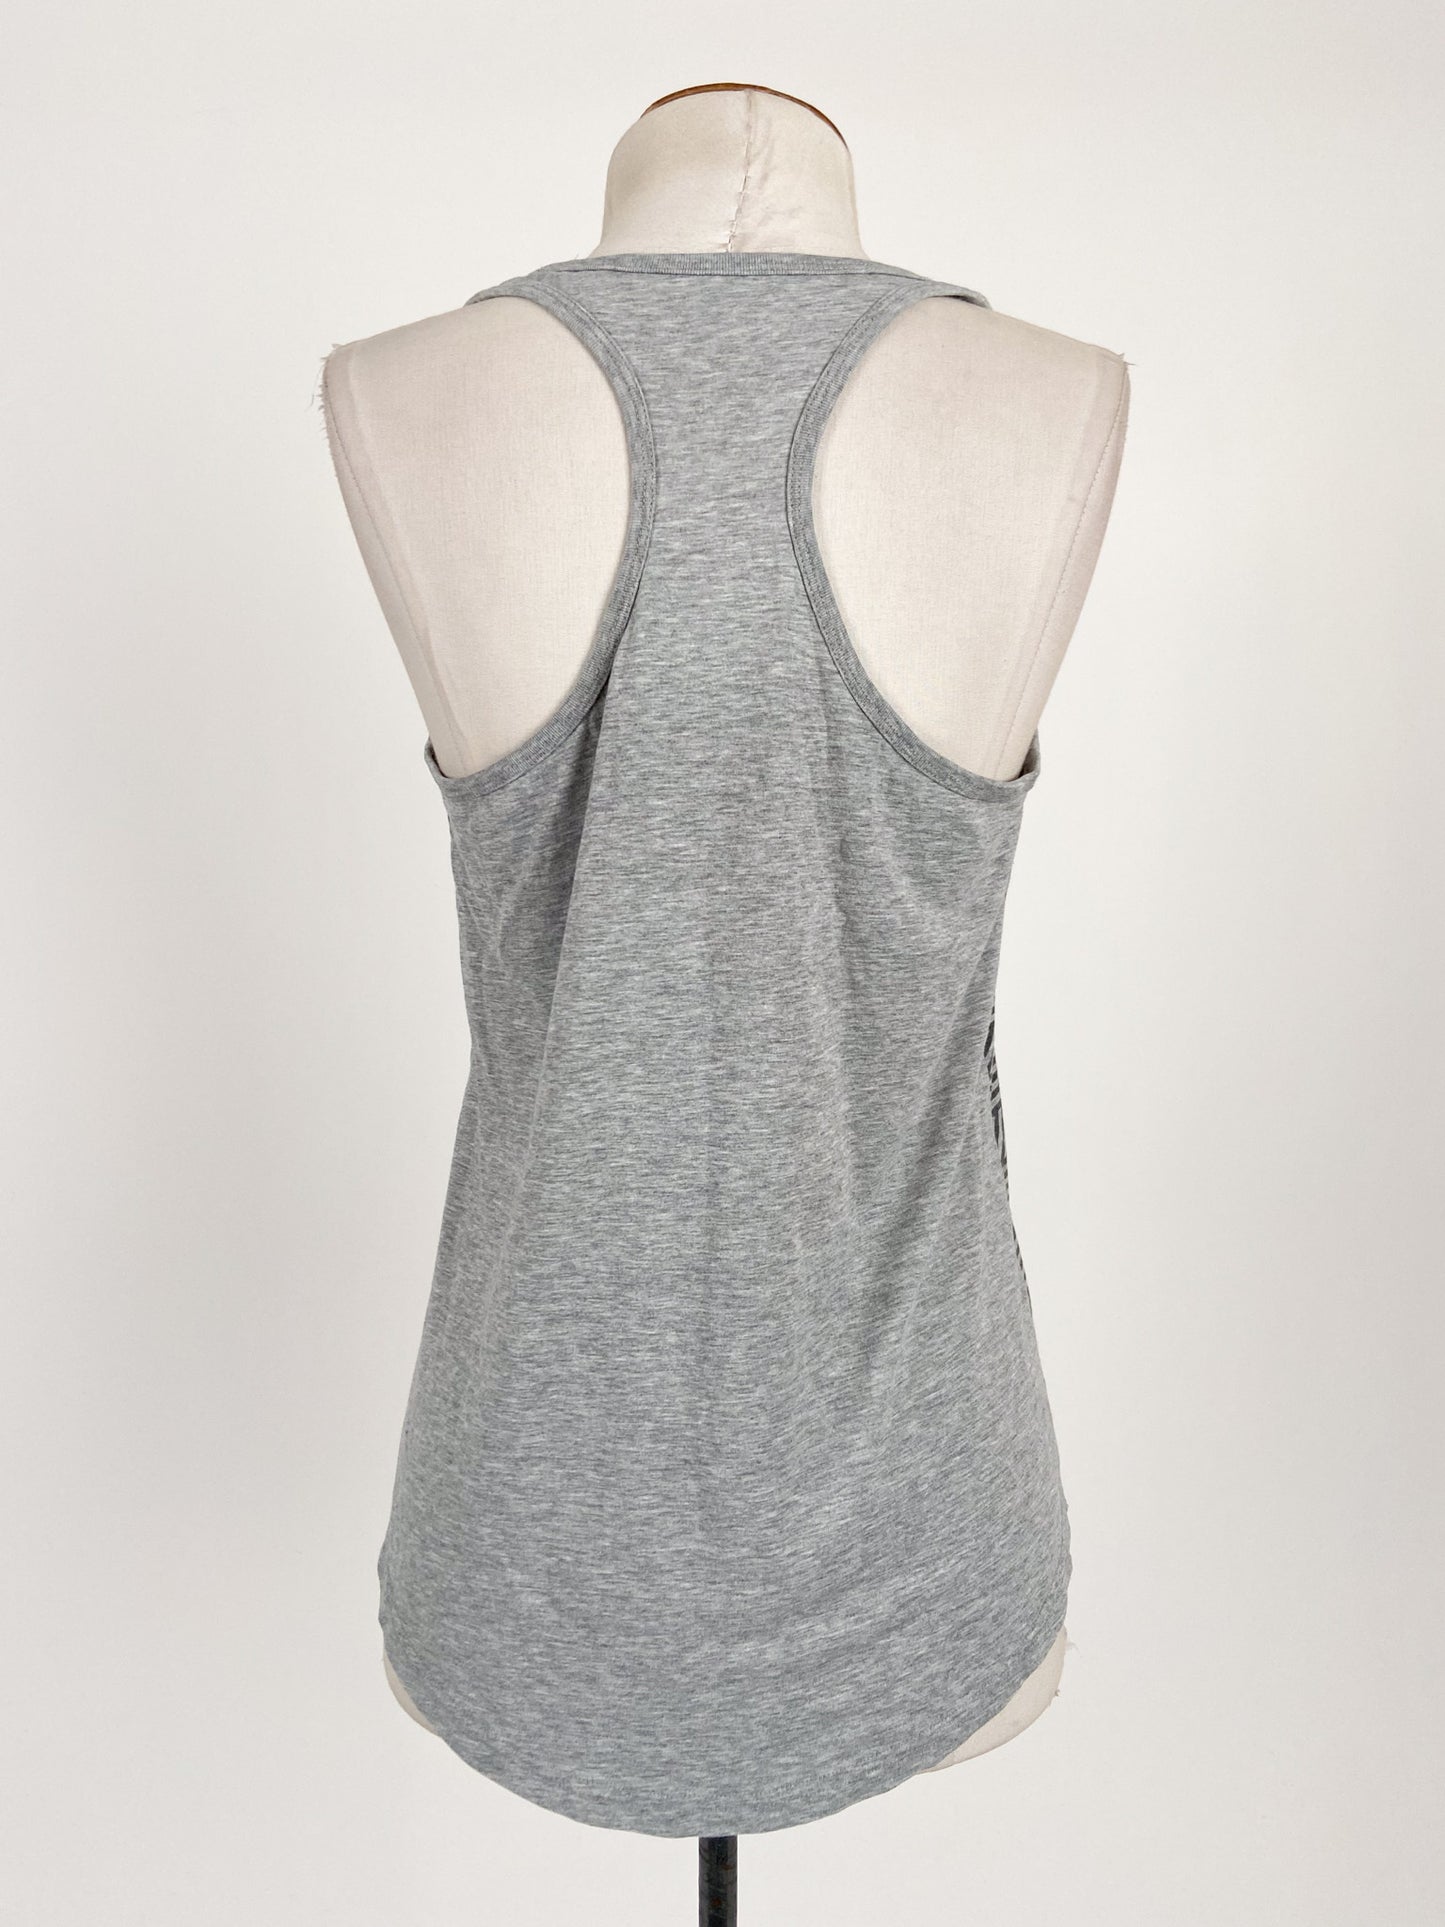 Nike | Grey Casual Activewear Top | Size S